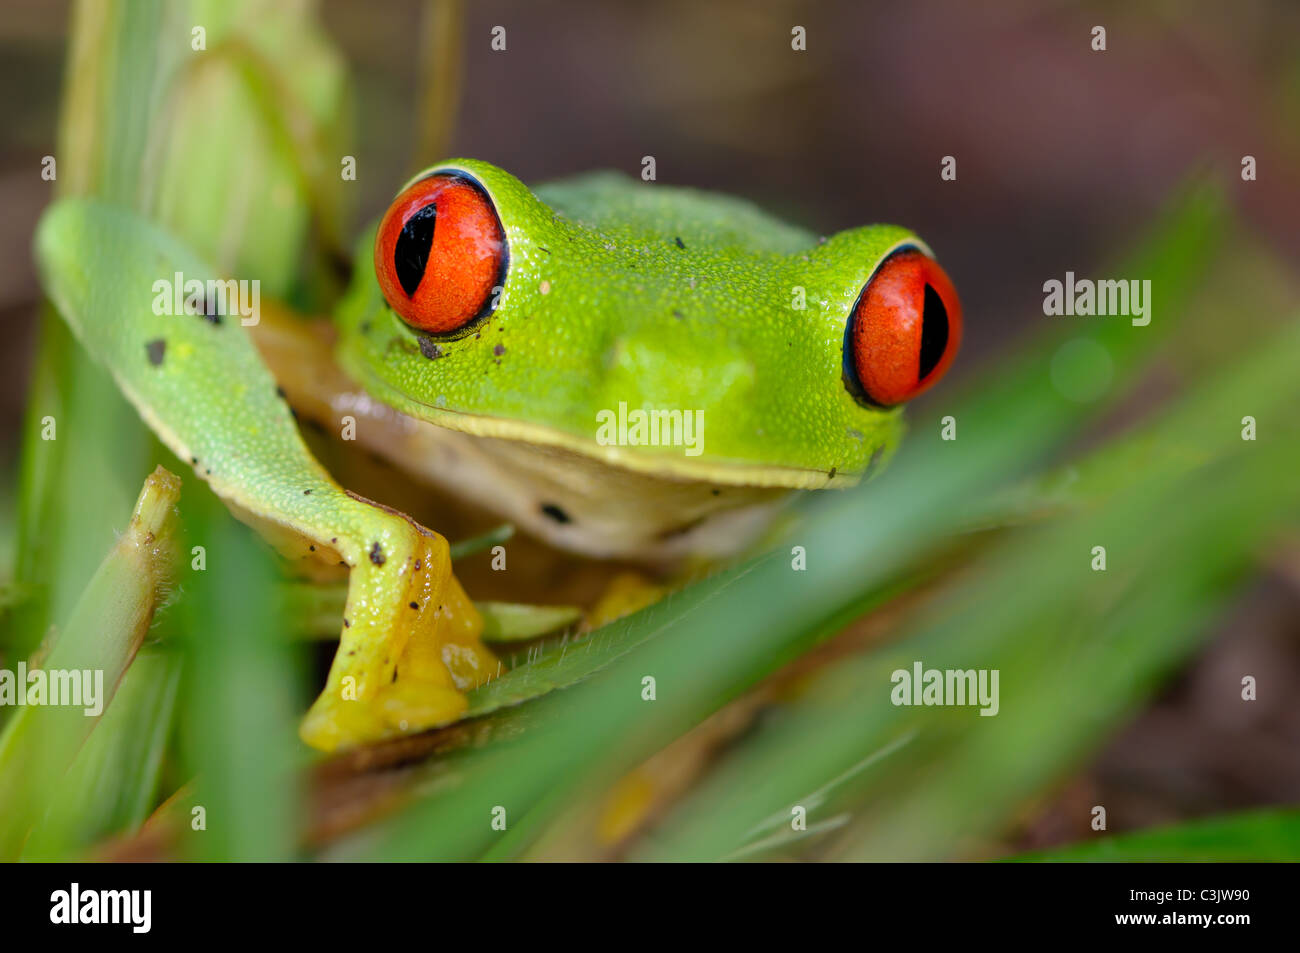 A misfit leaf frog (Agalychnia salator) peers inquisitively at the viewer. Stock Photo